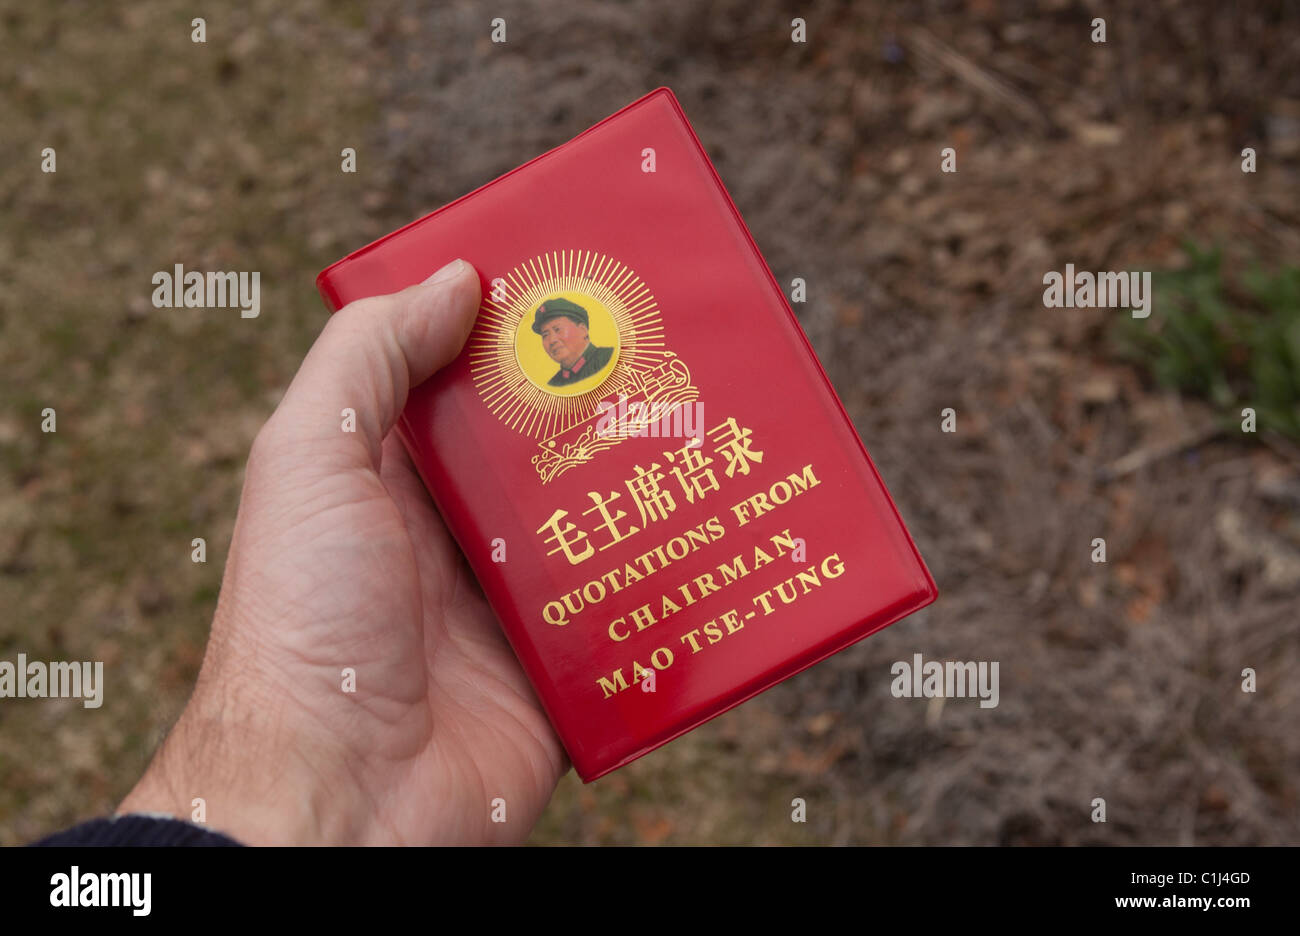 Quotations from Chairman Mao Tse-Tung. "The Little Red Book Stock Photo Alamy